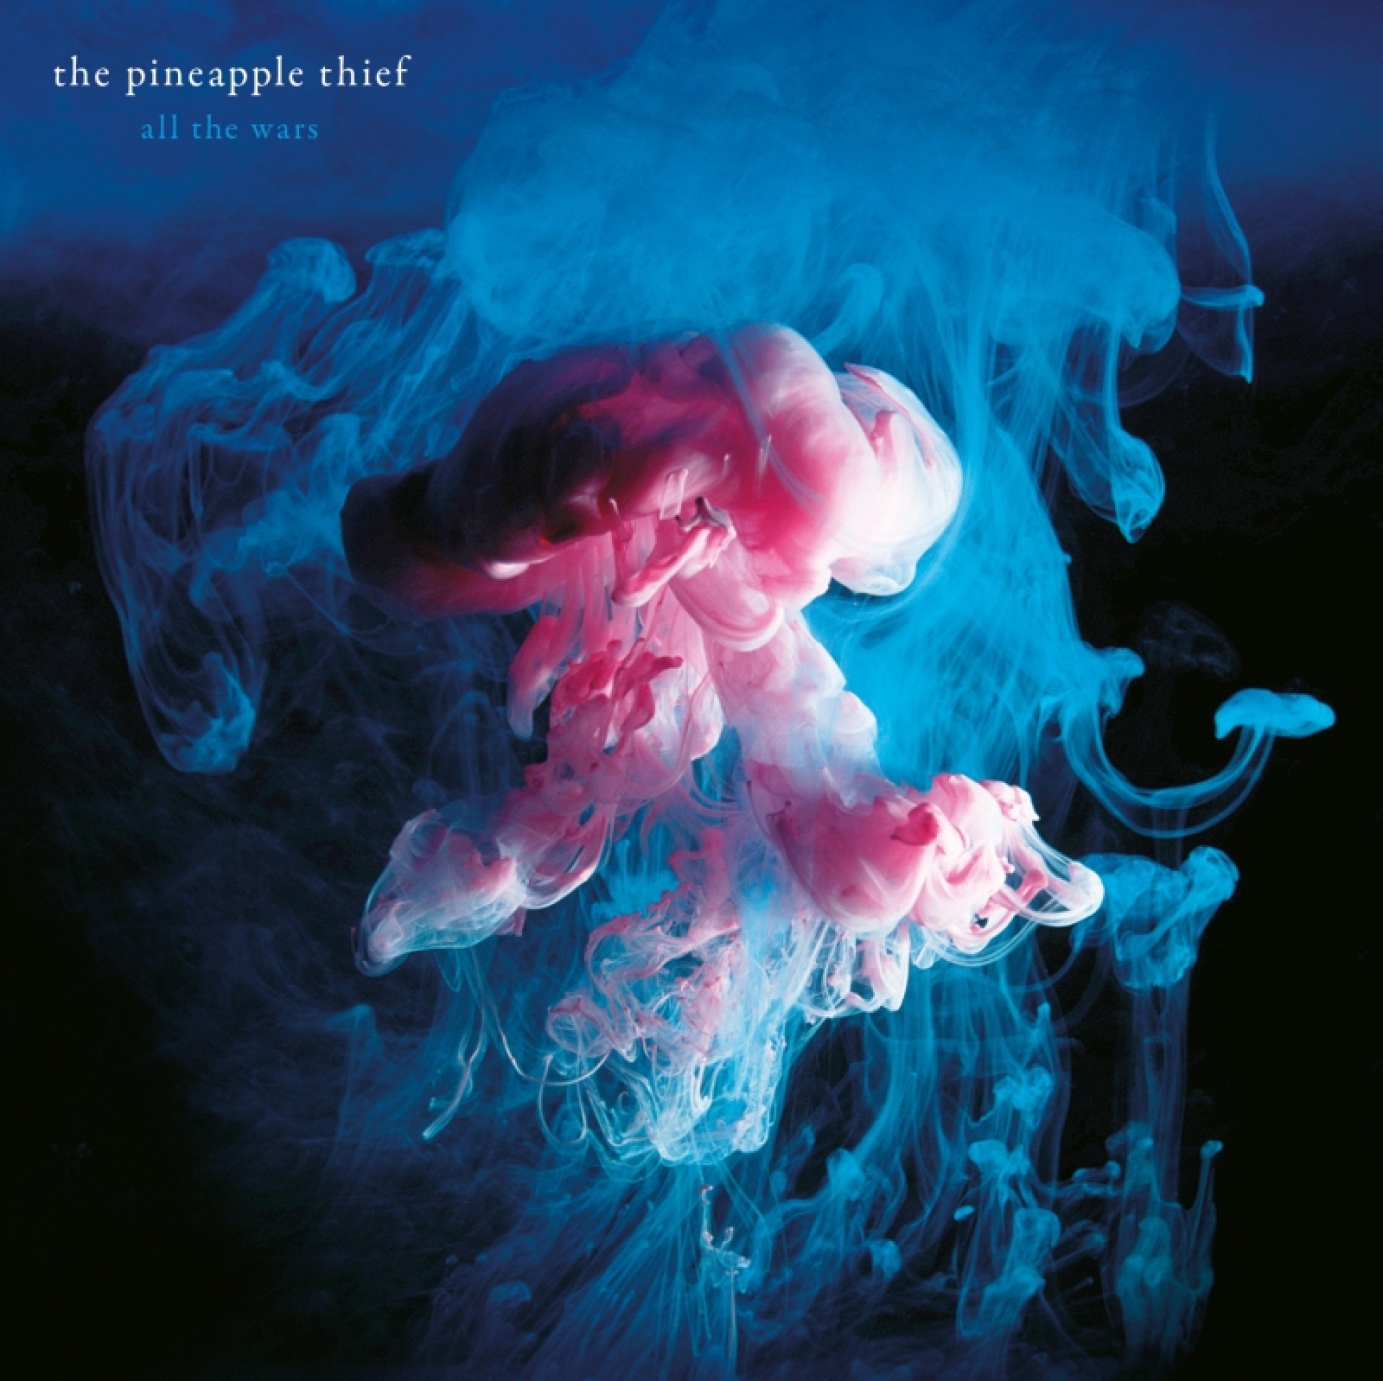 The Pineapple Thief - album art direction & video commissioning